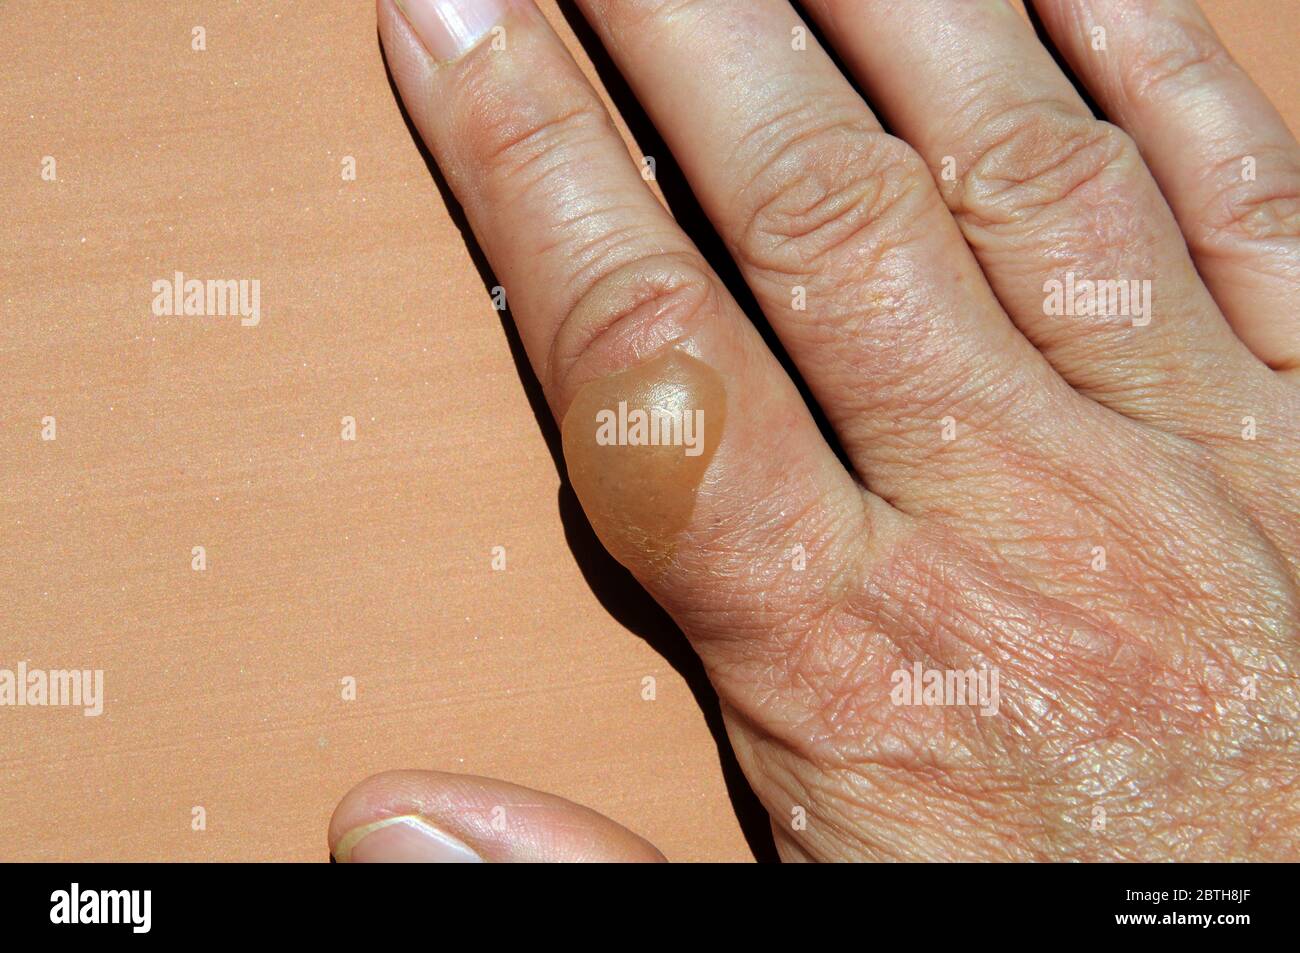 Large blister on woman’s hand caused by boiling water scald. Stock Photo